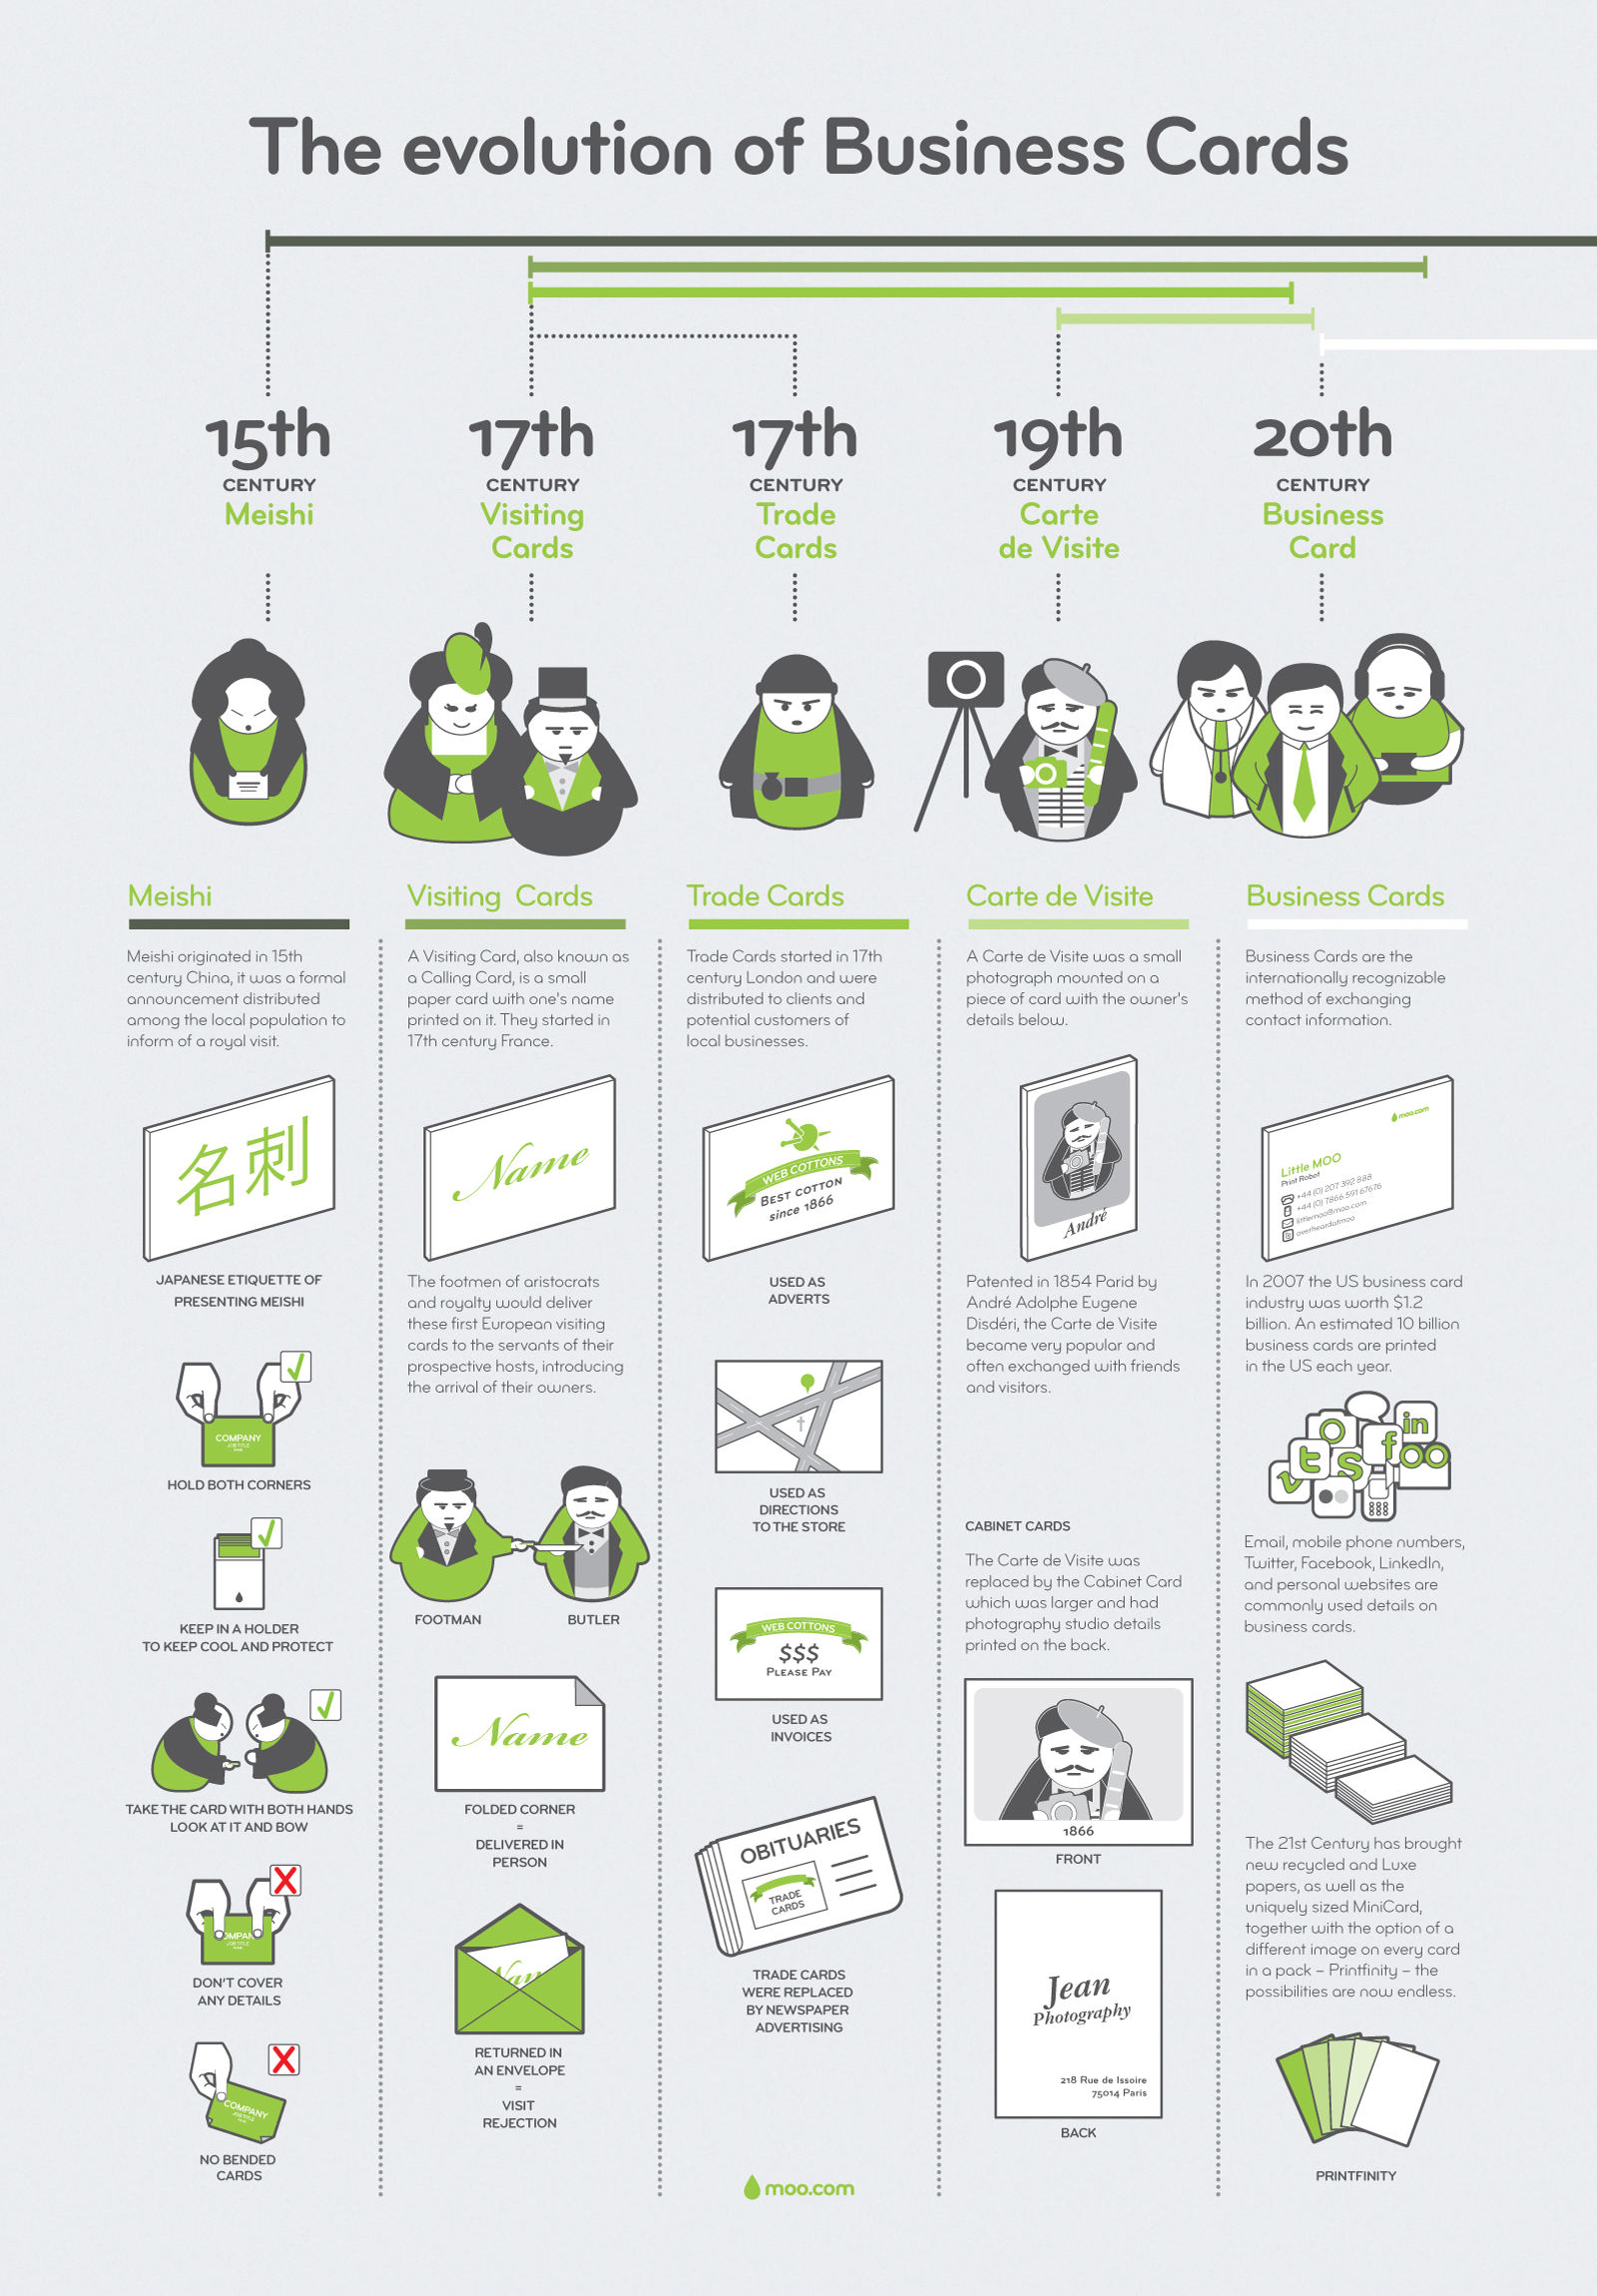 The Evolution of Business Cards (Infographic)